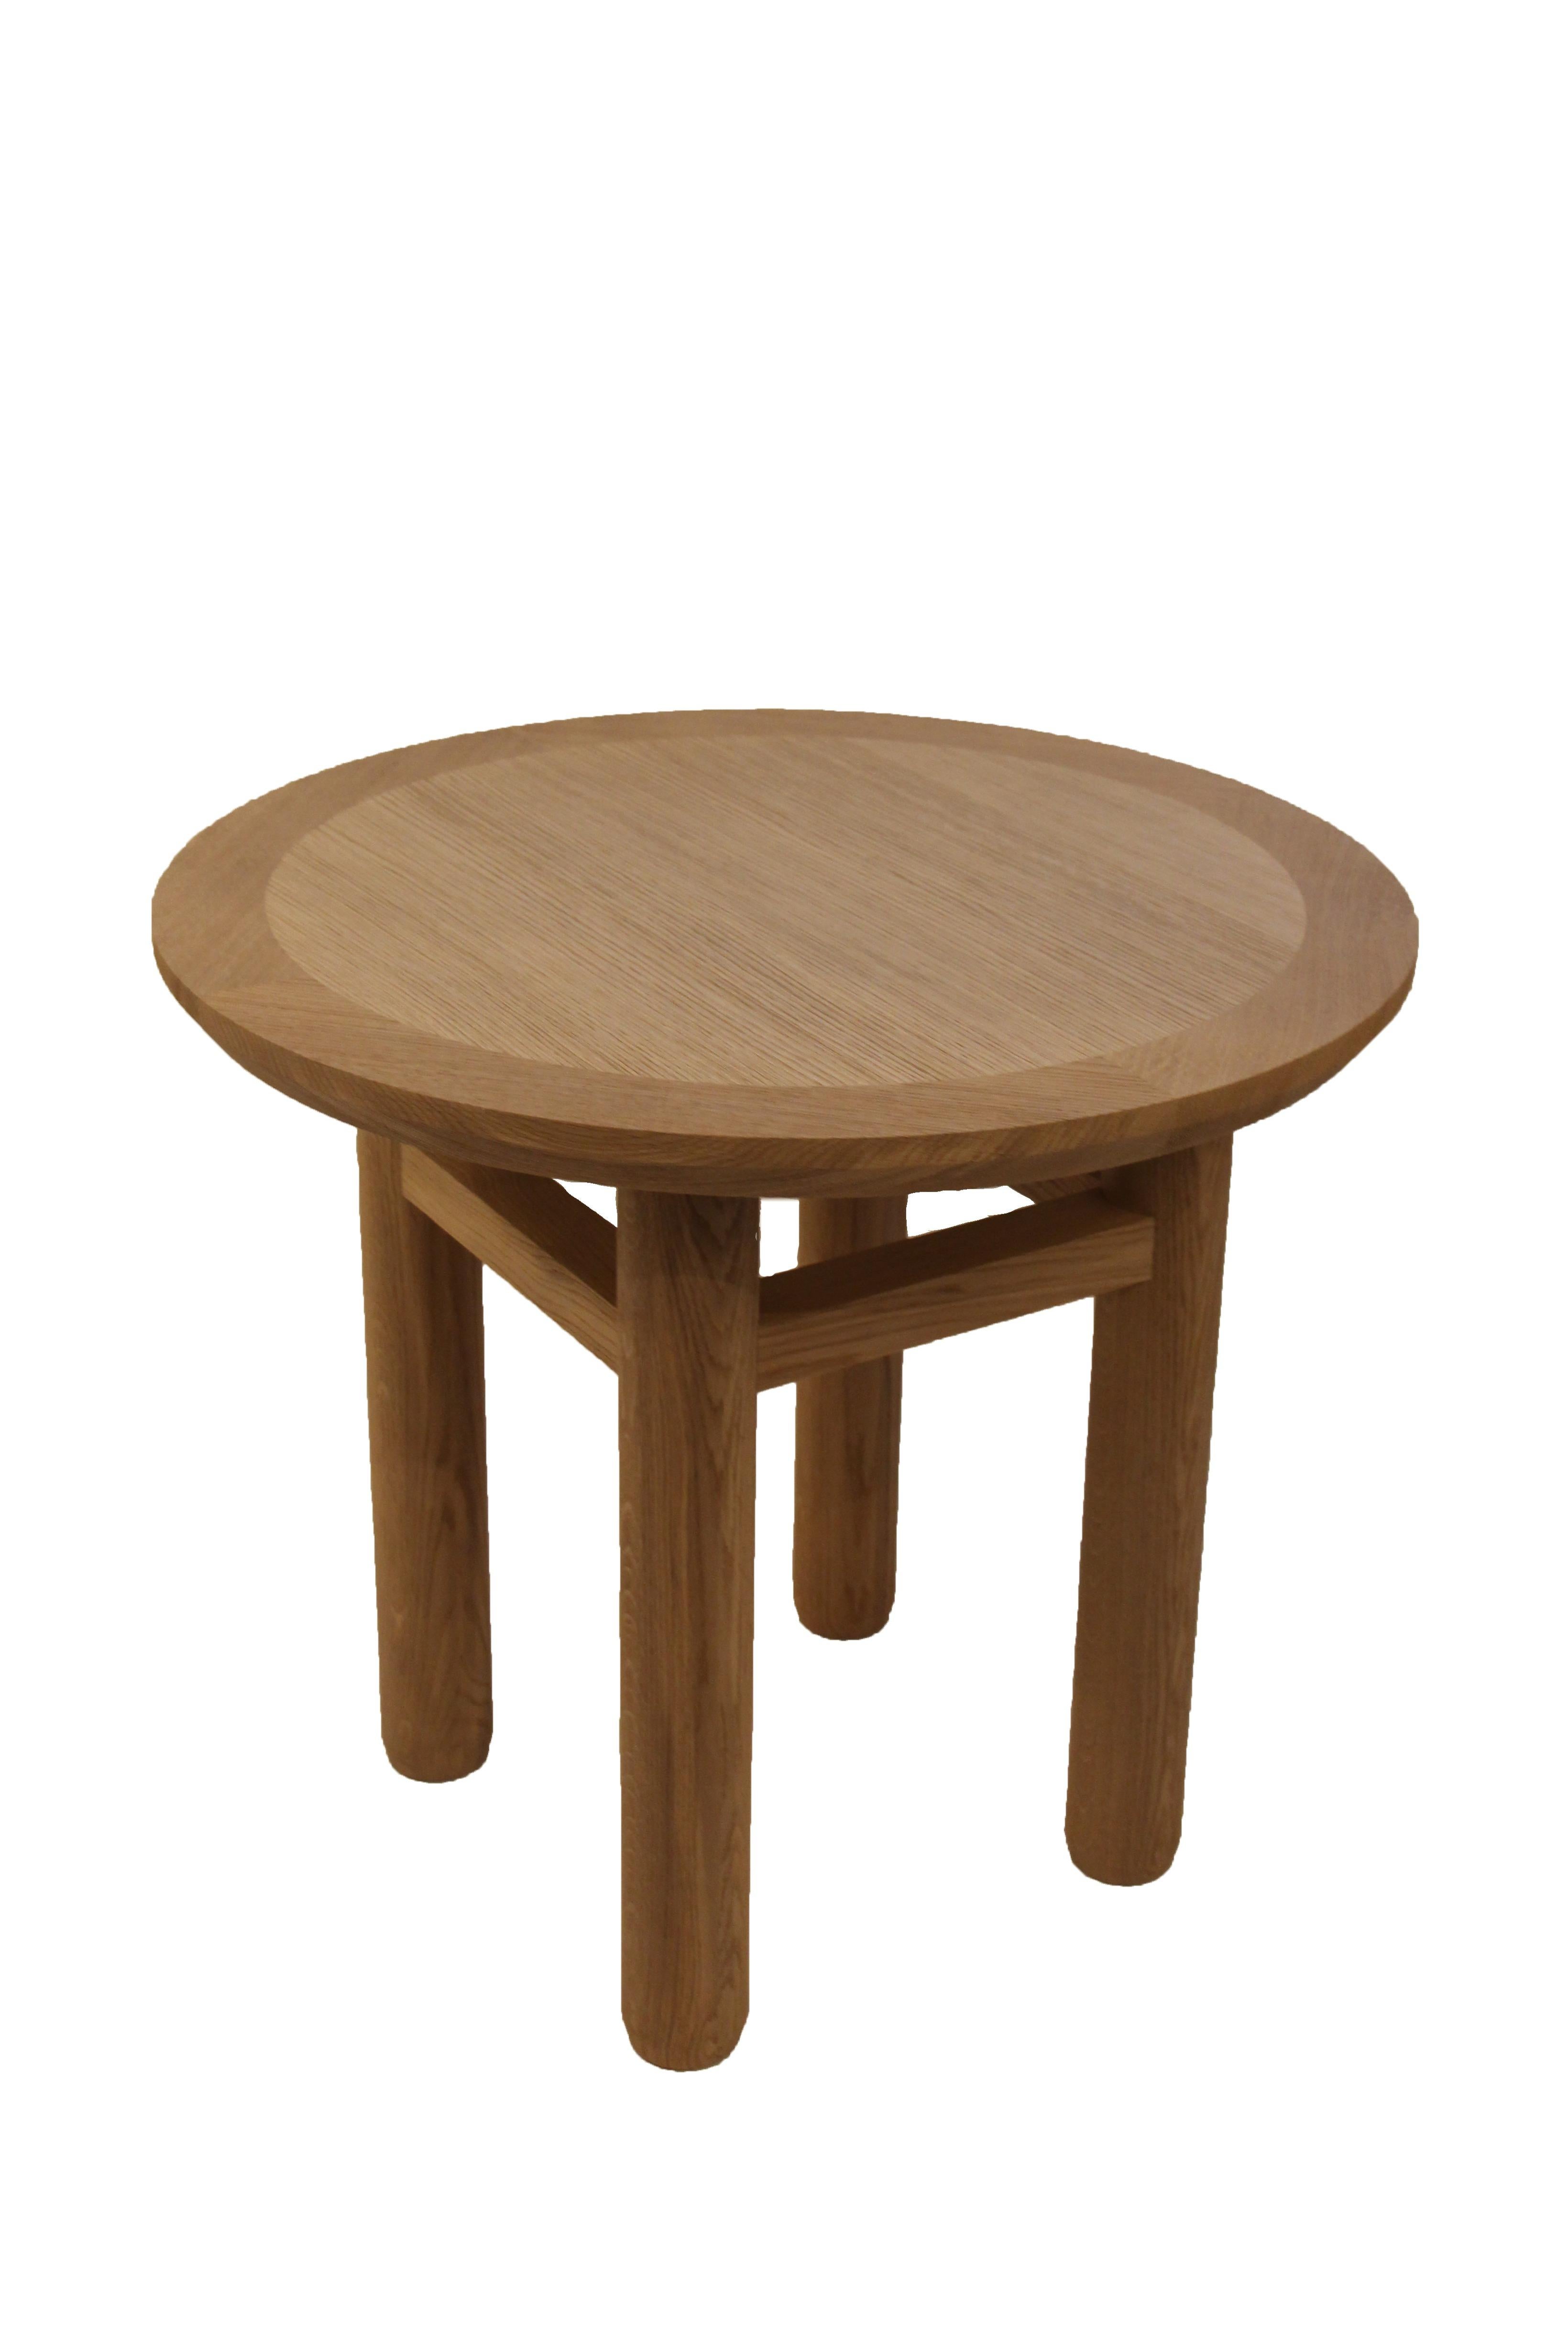 Thouars round table in brushed oak, is designed by the Atelier Linné collective in 2013. It is characterized by a round top in solid oak and a base made up of 4 round recessed legs joined by a square spacer.

Atelier Linné is a collective of